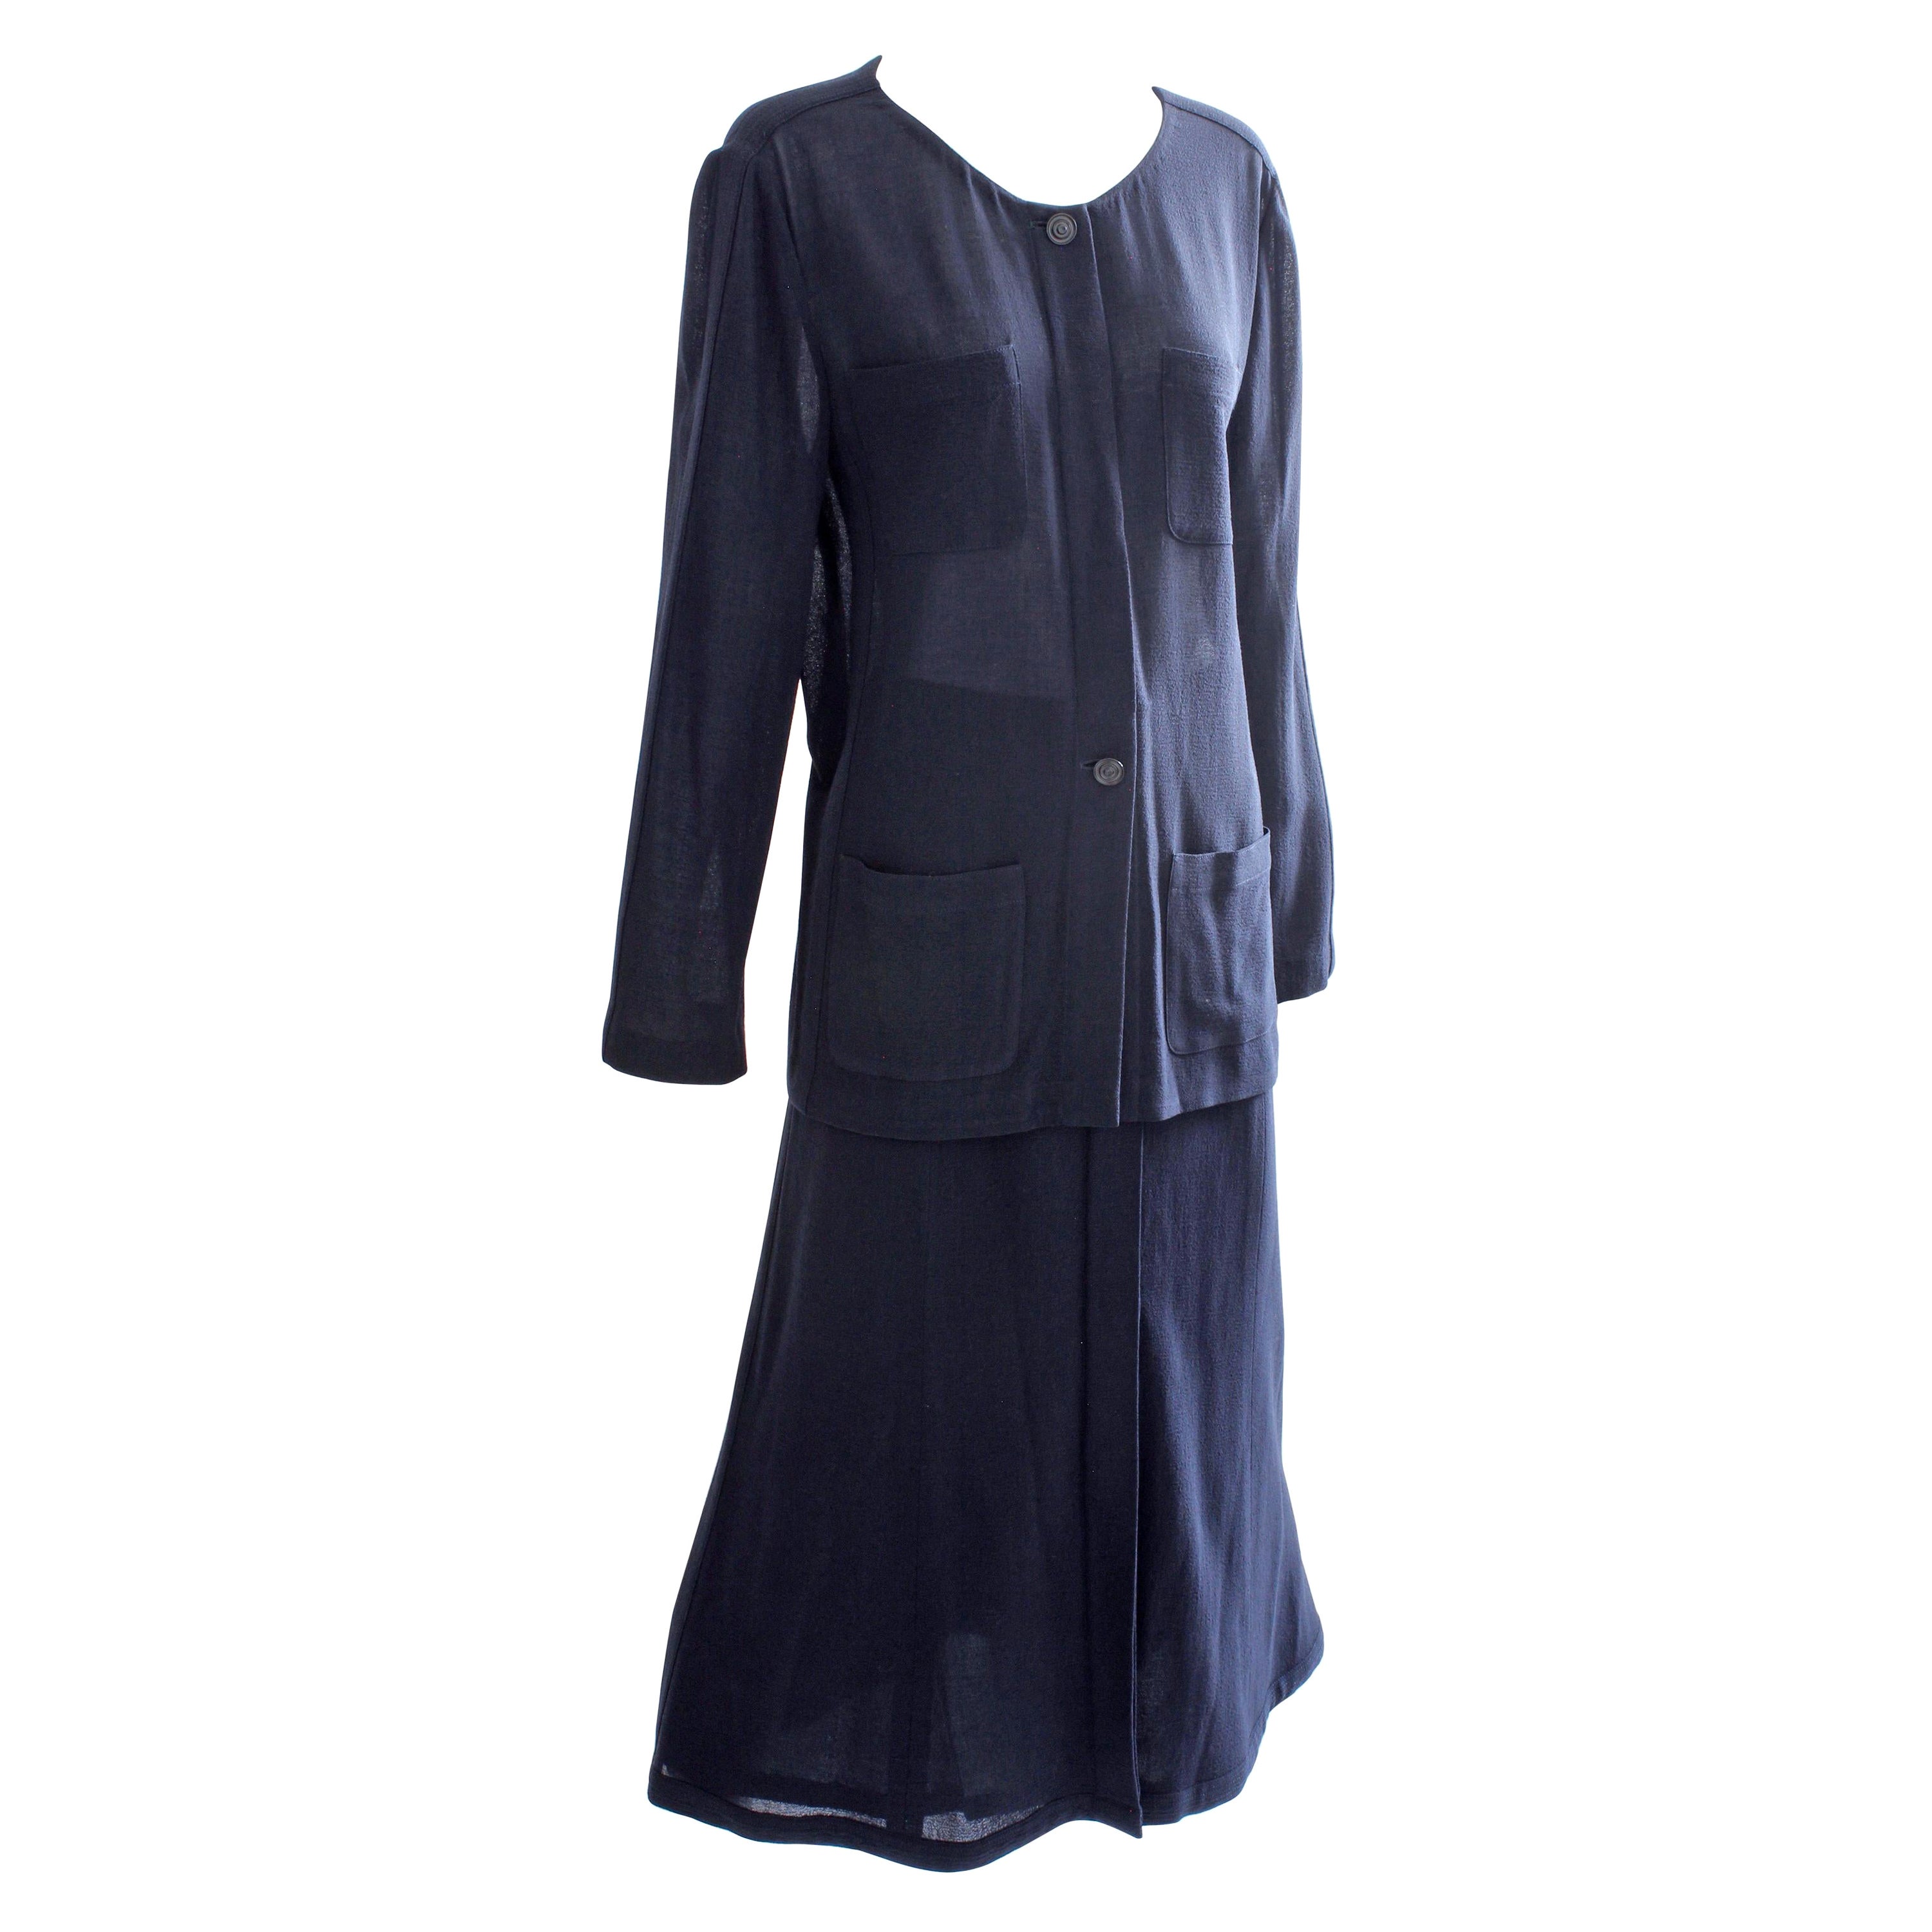 Chanel Sheer Wool Crepe Jacket and Button Front Skirt Suit 2pc Navy Blue Sz 44